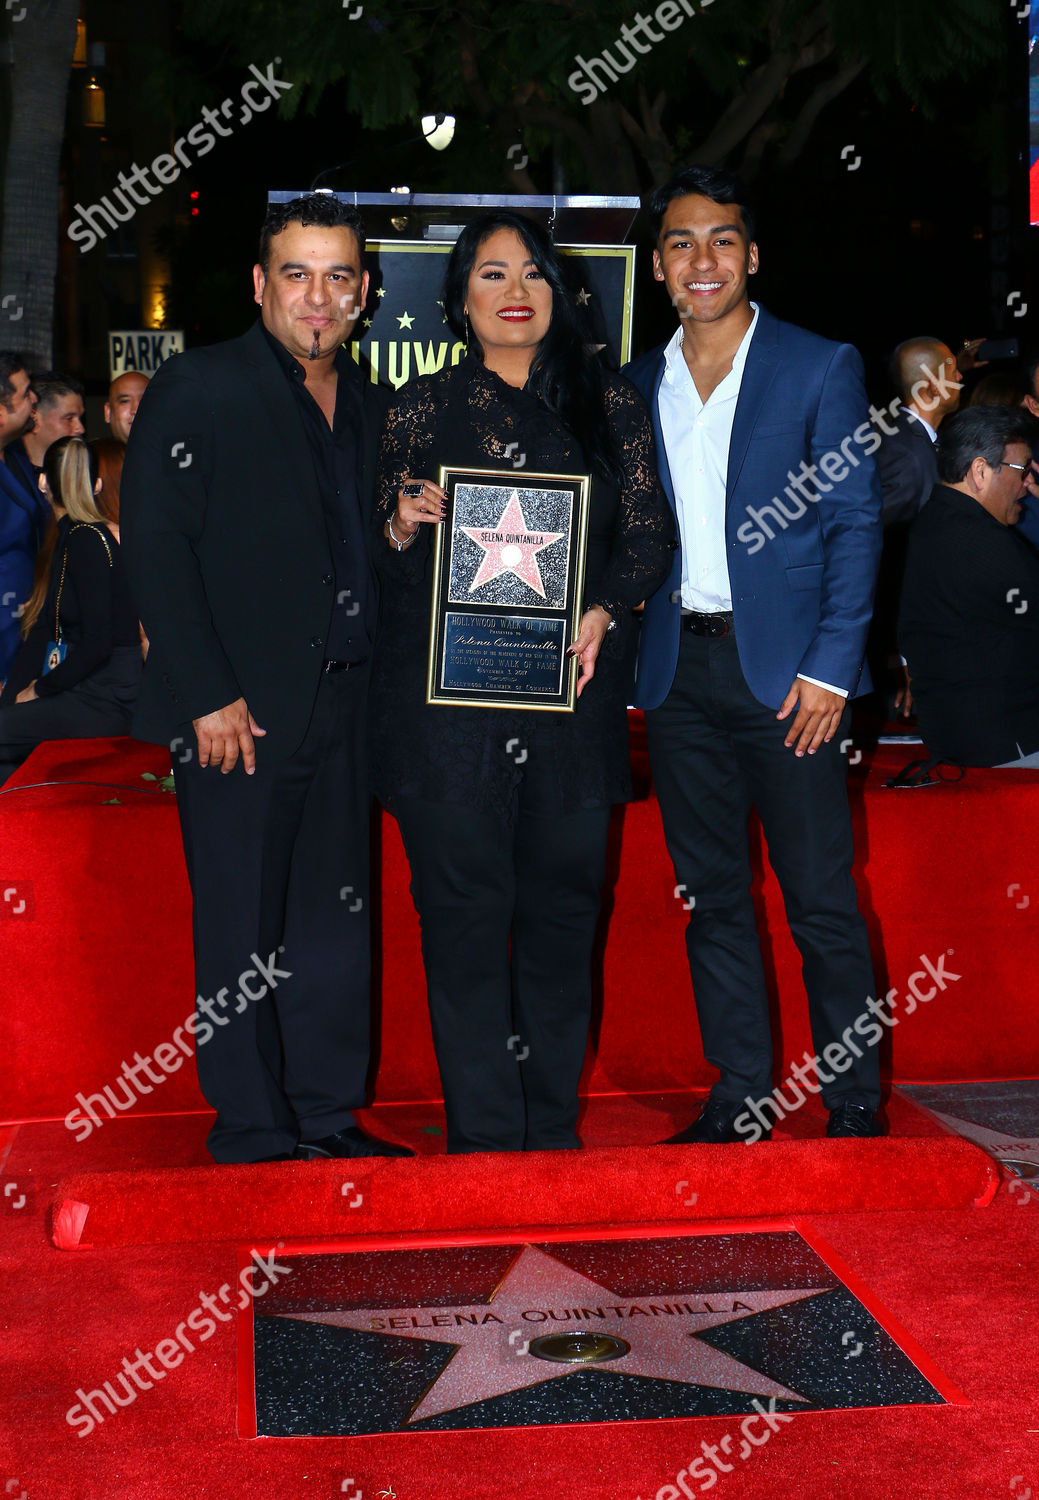 ¿Cuánto mide Suzette Quintanilla? - Altura - Real height Selena-quintanilla-posthumously-honored-with-star-on-the-hollywood-walk-of-fame-los-angeles-usa-shutterstock-editorial-9188782ak